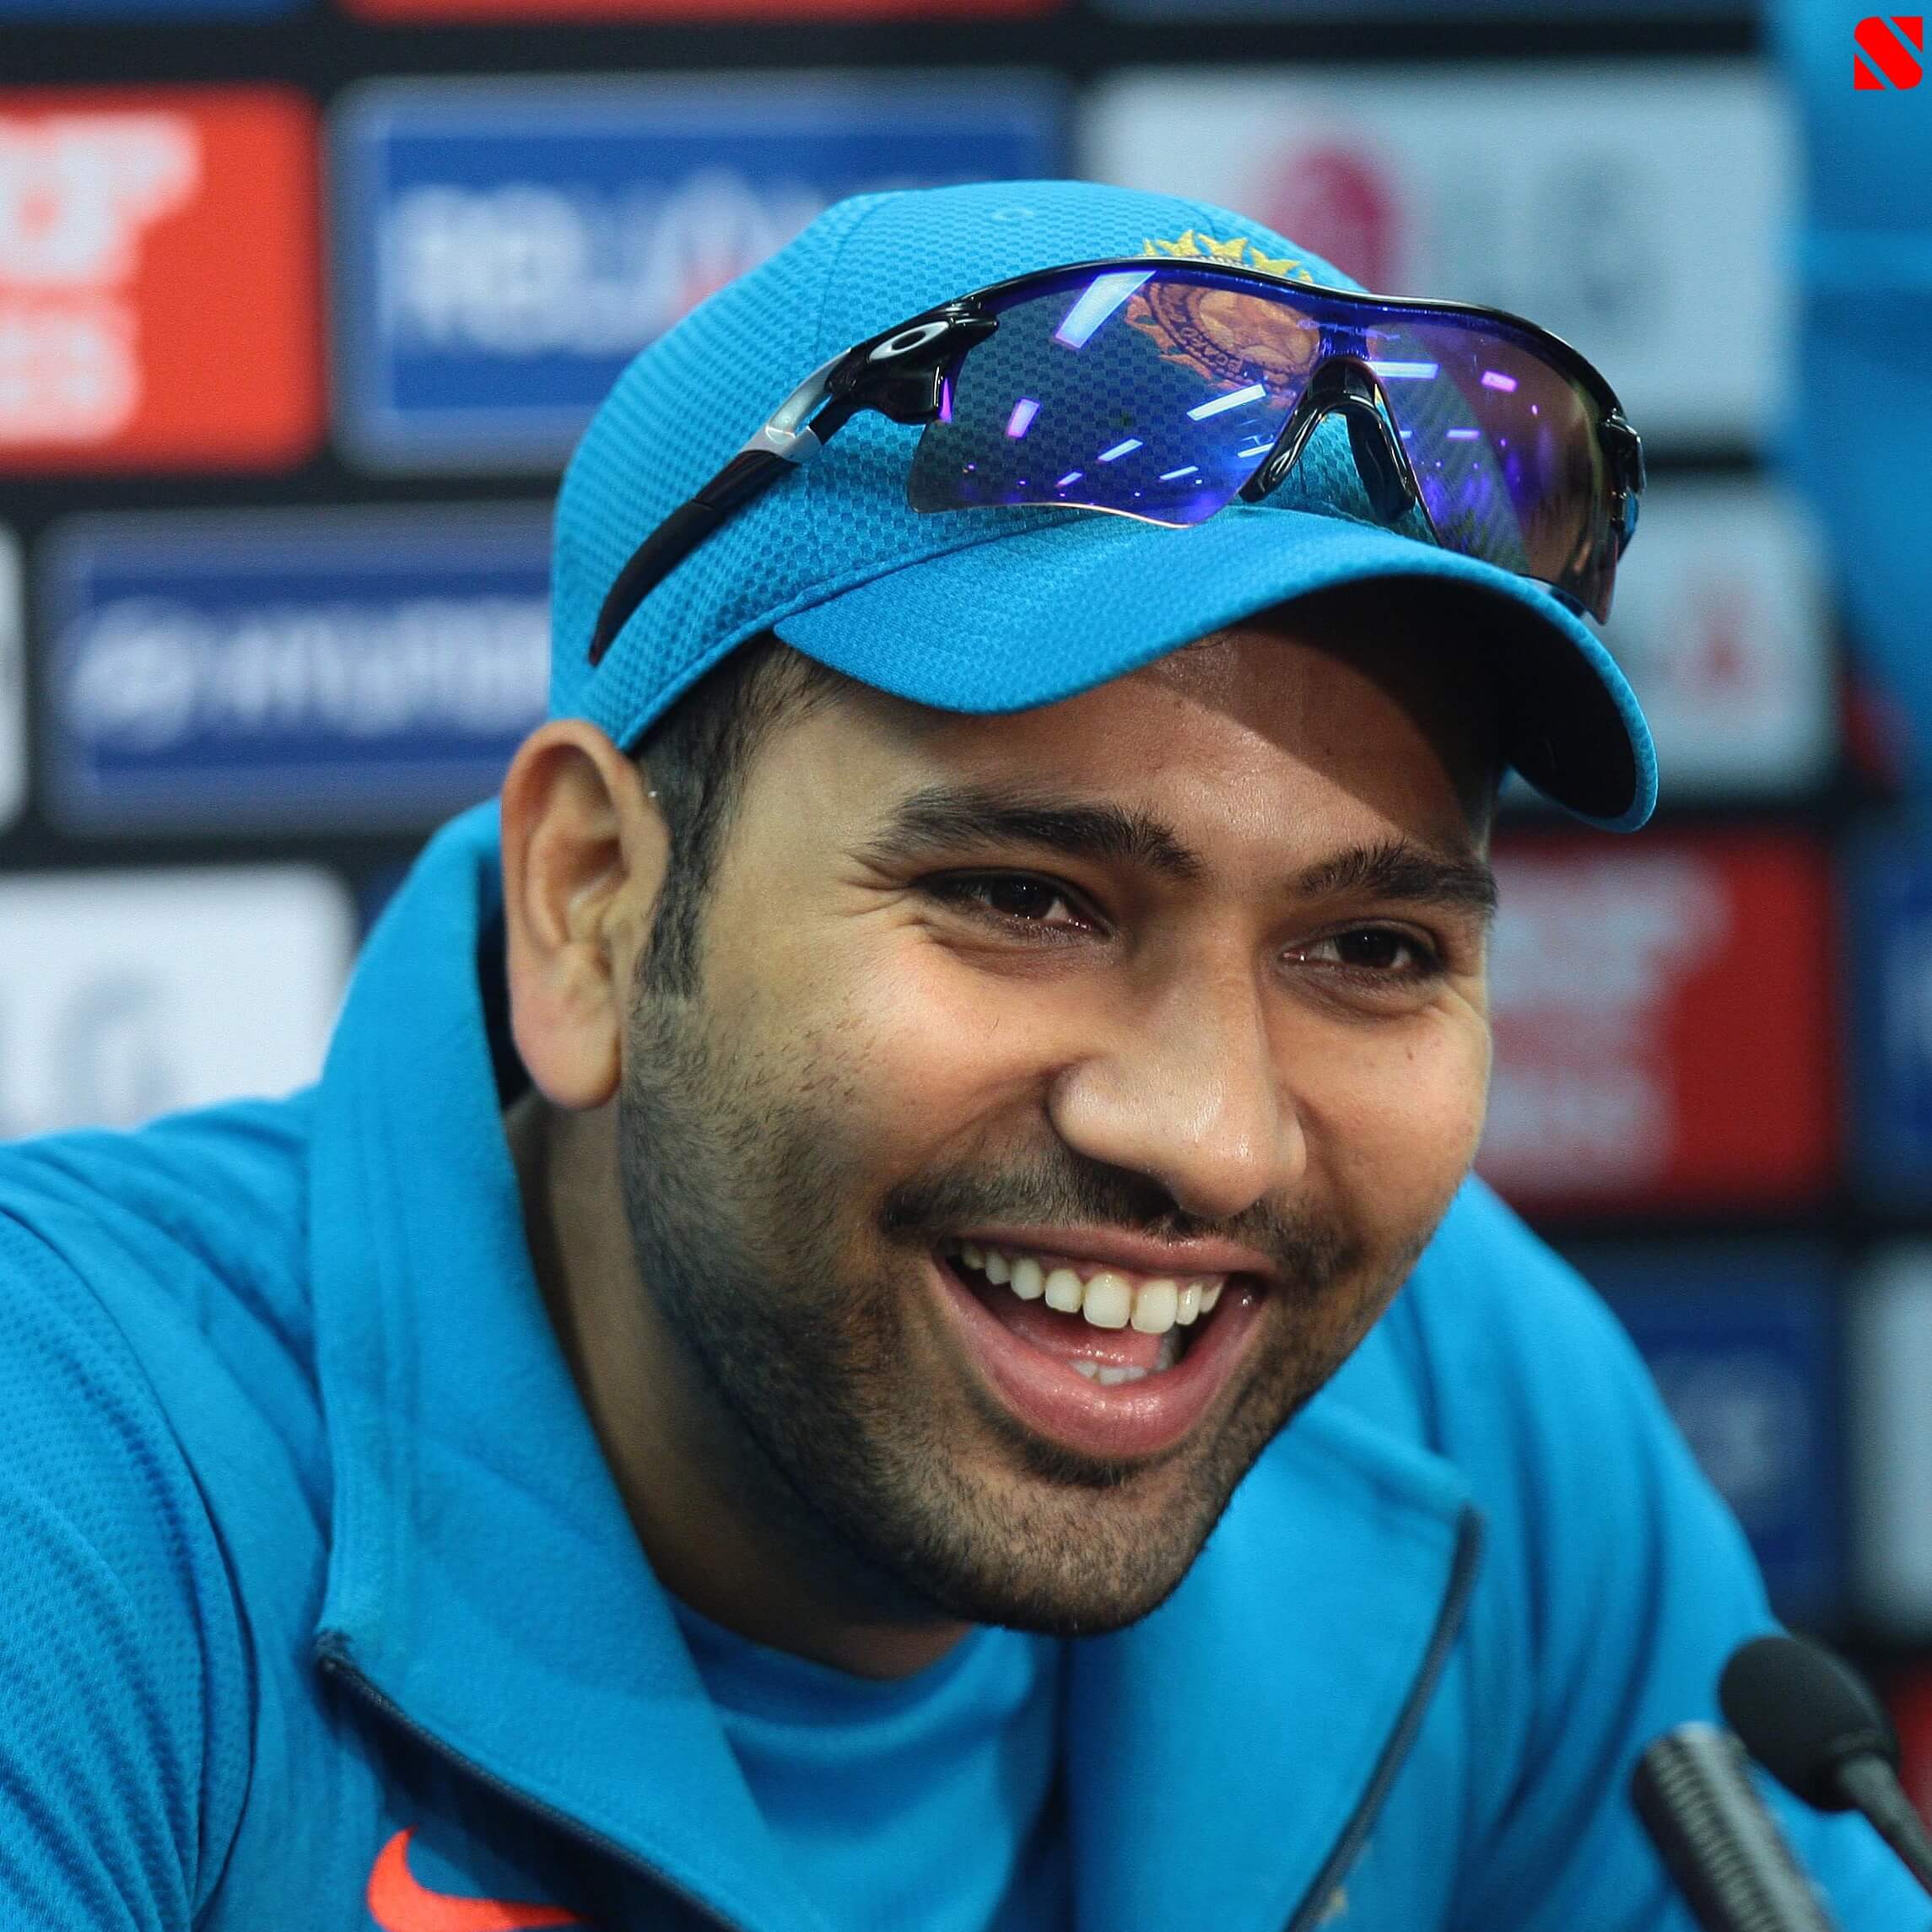 Rohit Sharma (Hitman) - Indian Cricket Player - Career, Age, Wife, Stats